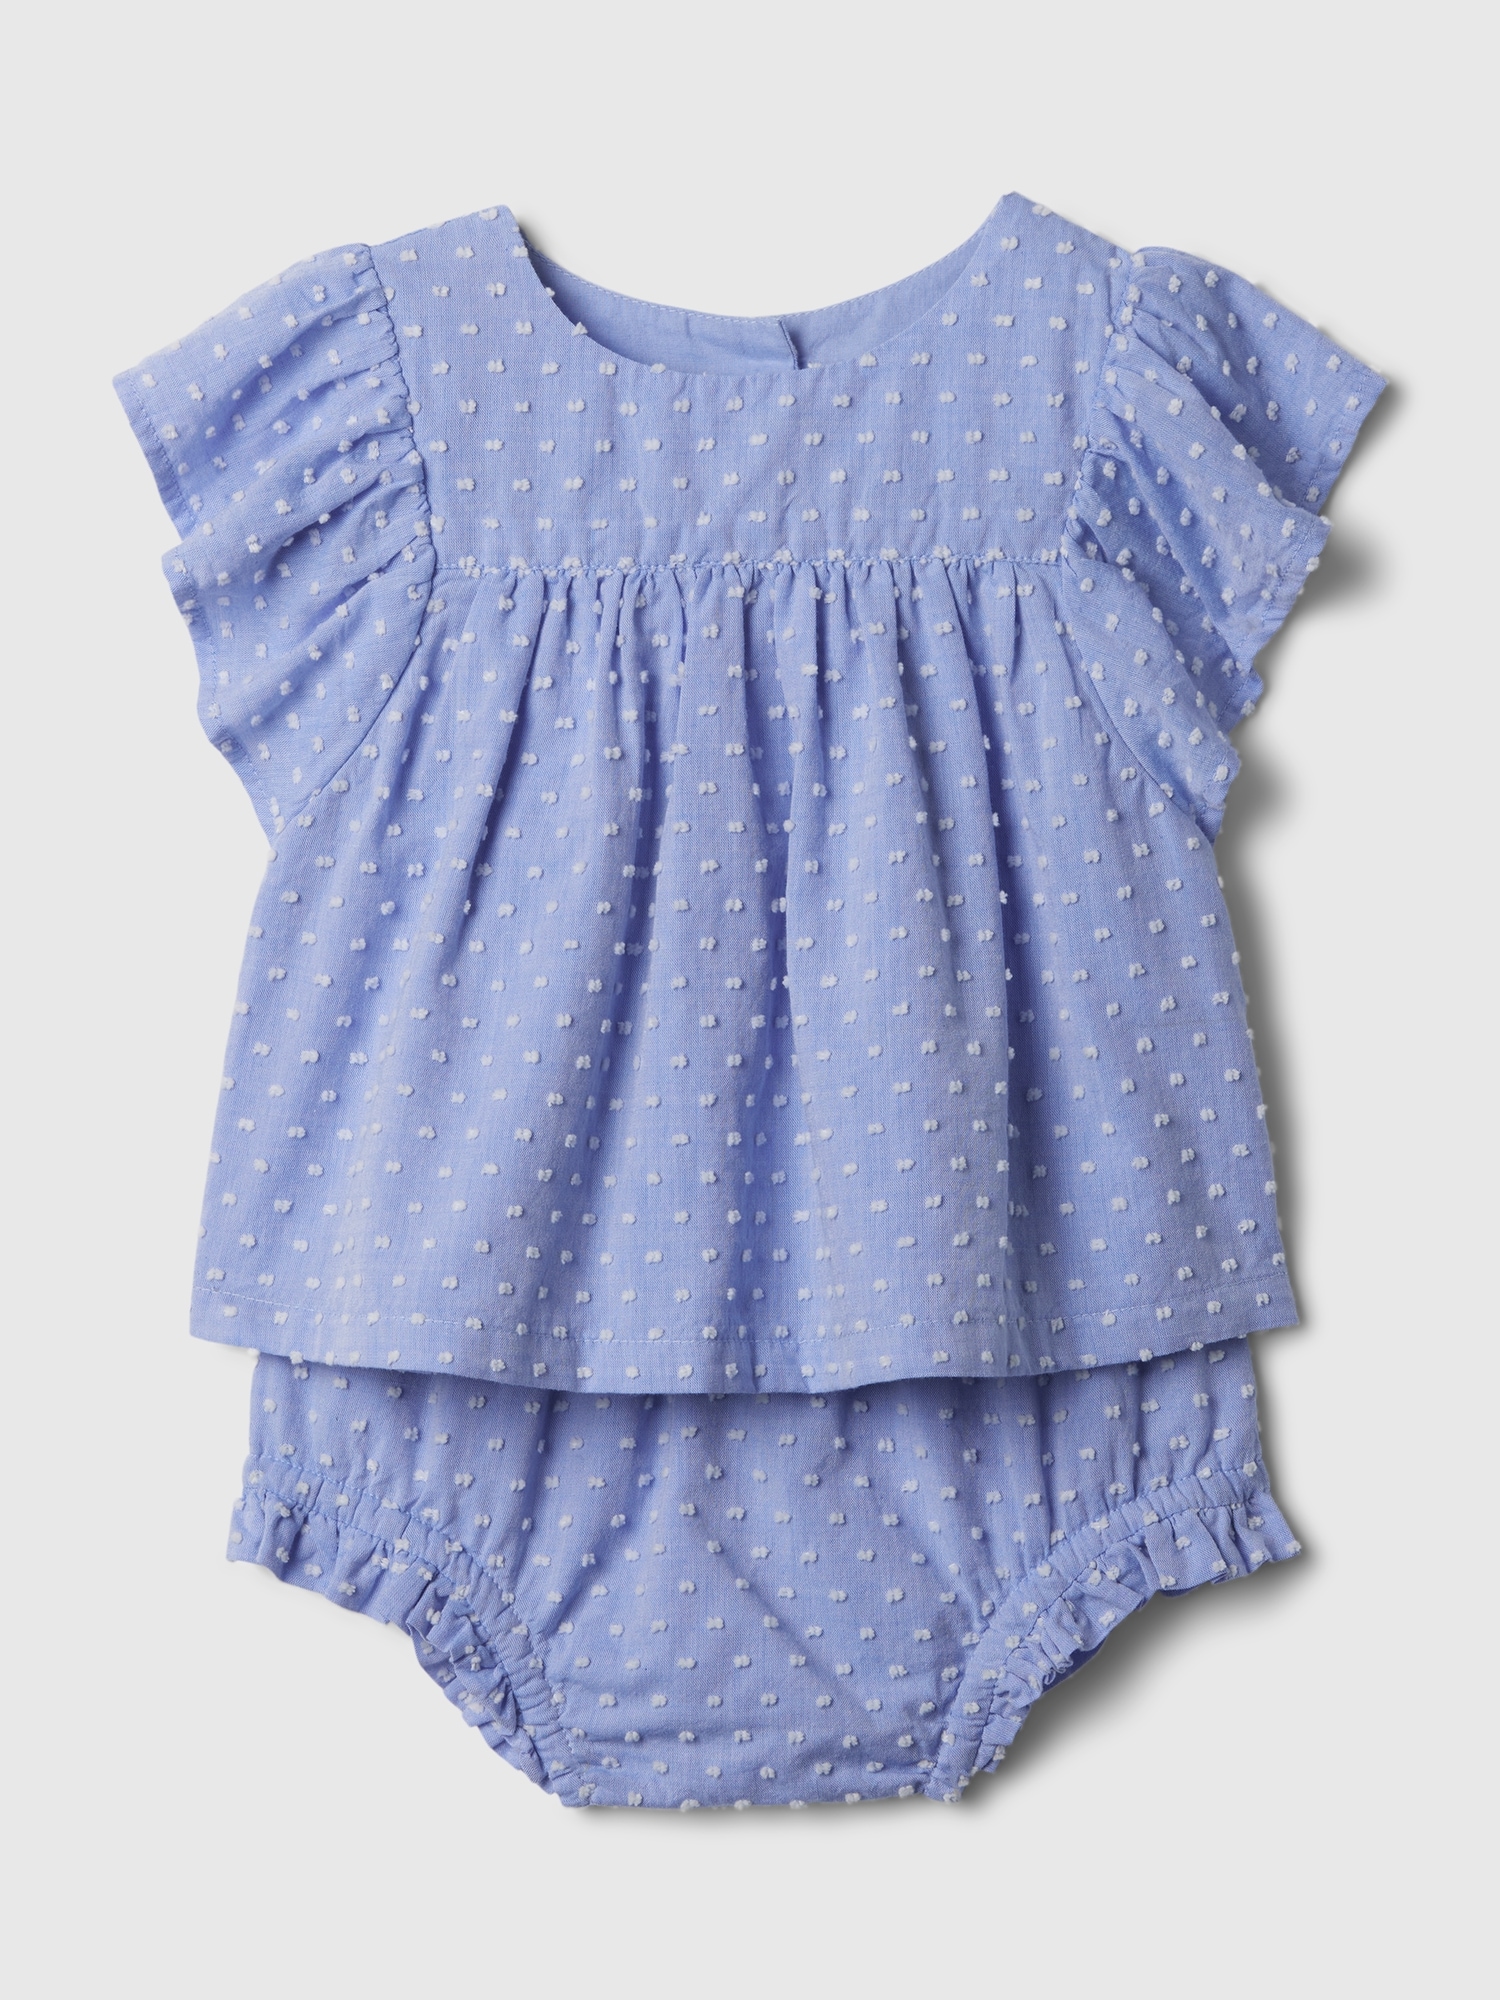 Baby Ruffle Outfit Set